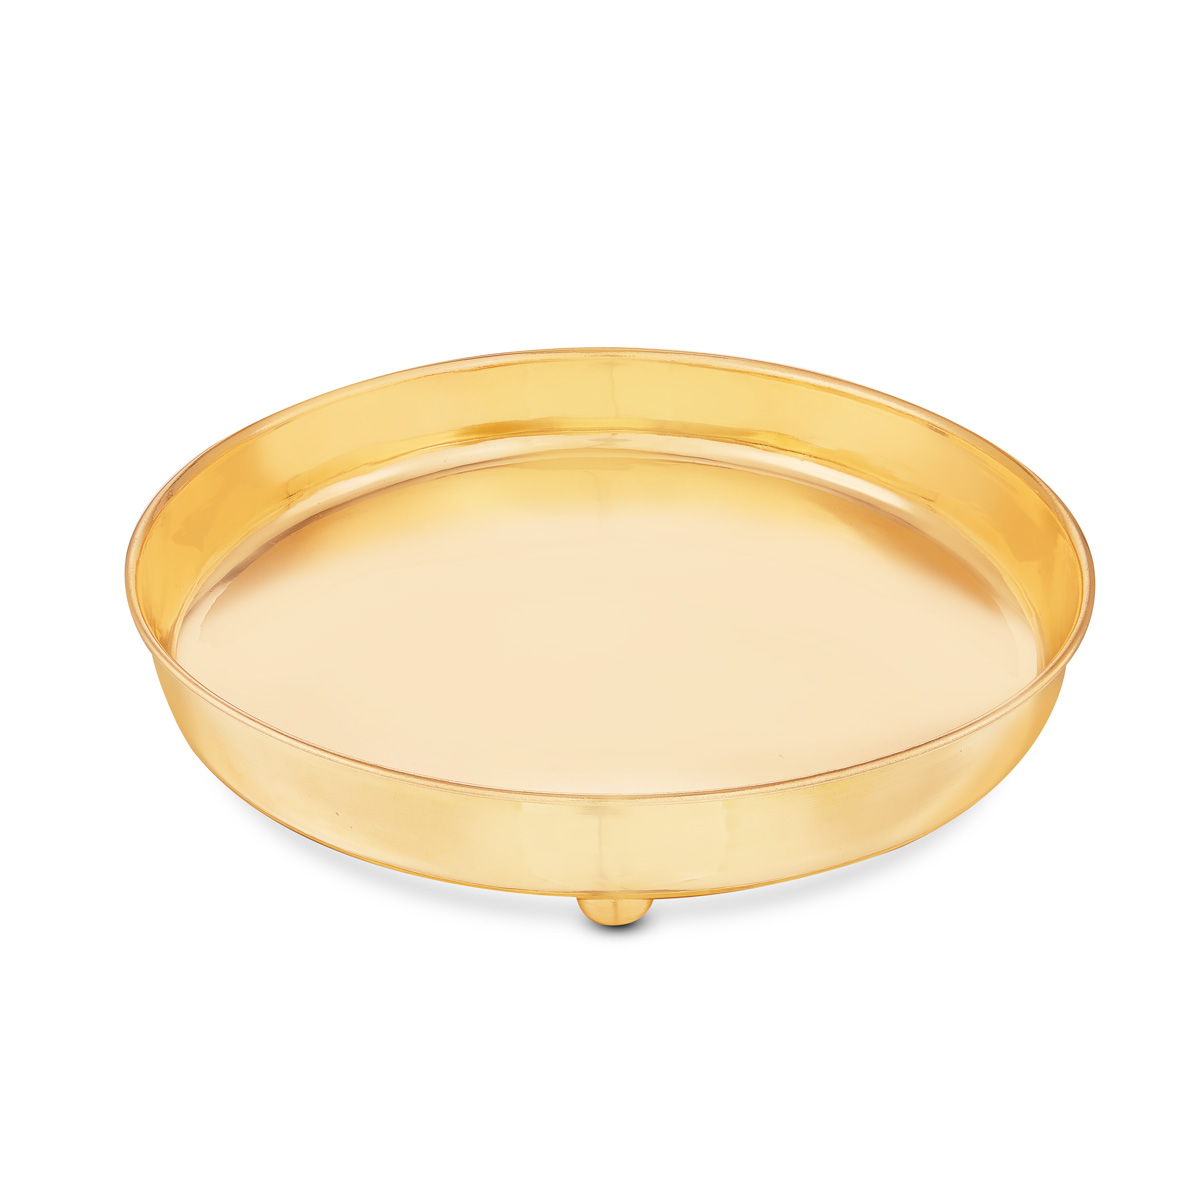 Food Plate In Gold